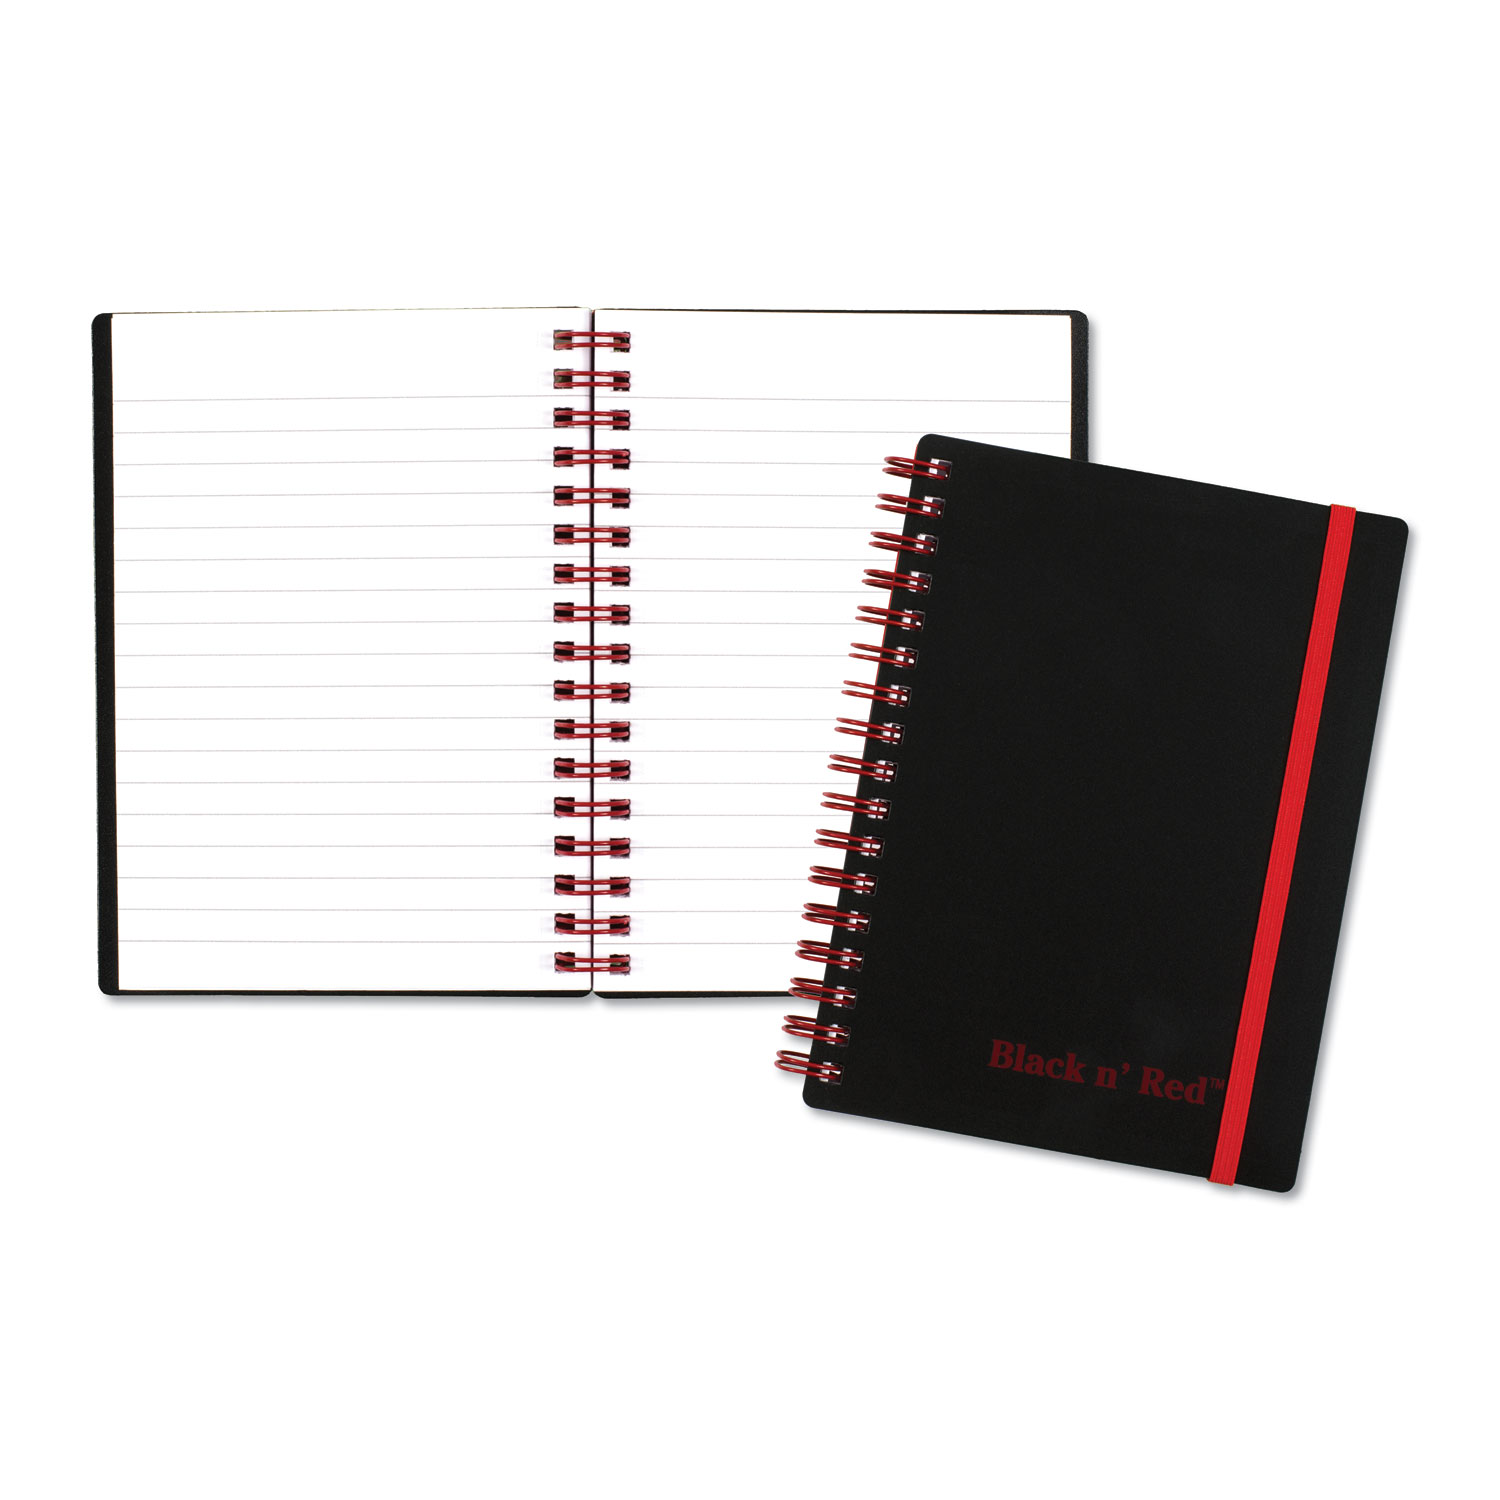  Black n' Red F67010 Twin Wire Poly Cover Notebook, Wide/Legal Rule, Black Cover, 5.88 x 4.13, 70 Sheets (JDKF67010) 